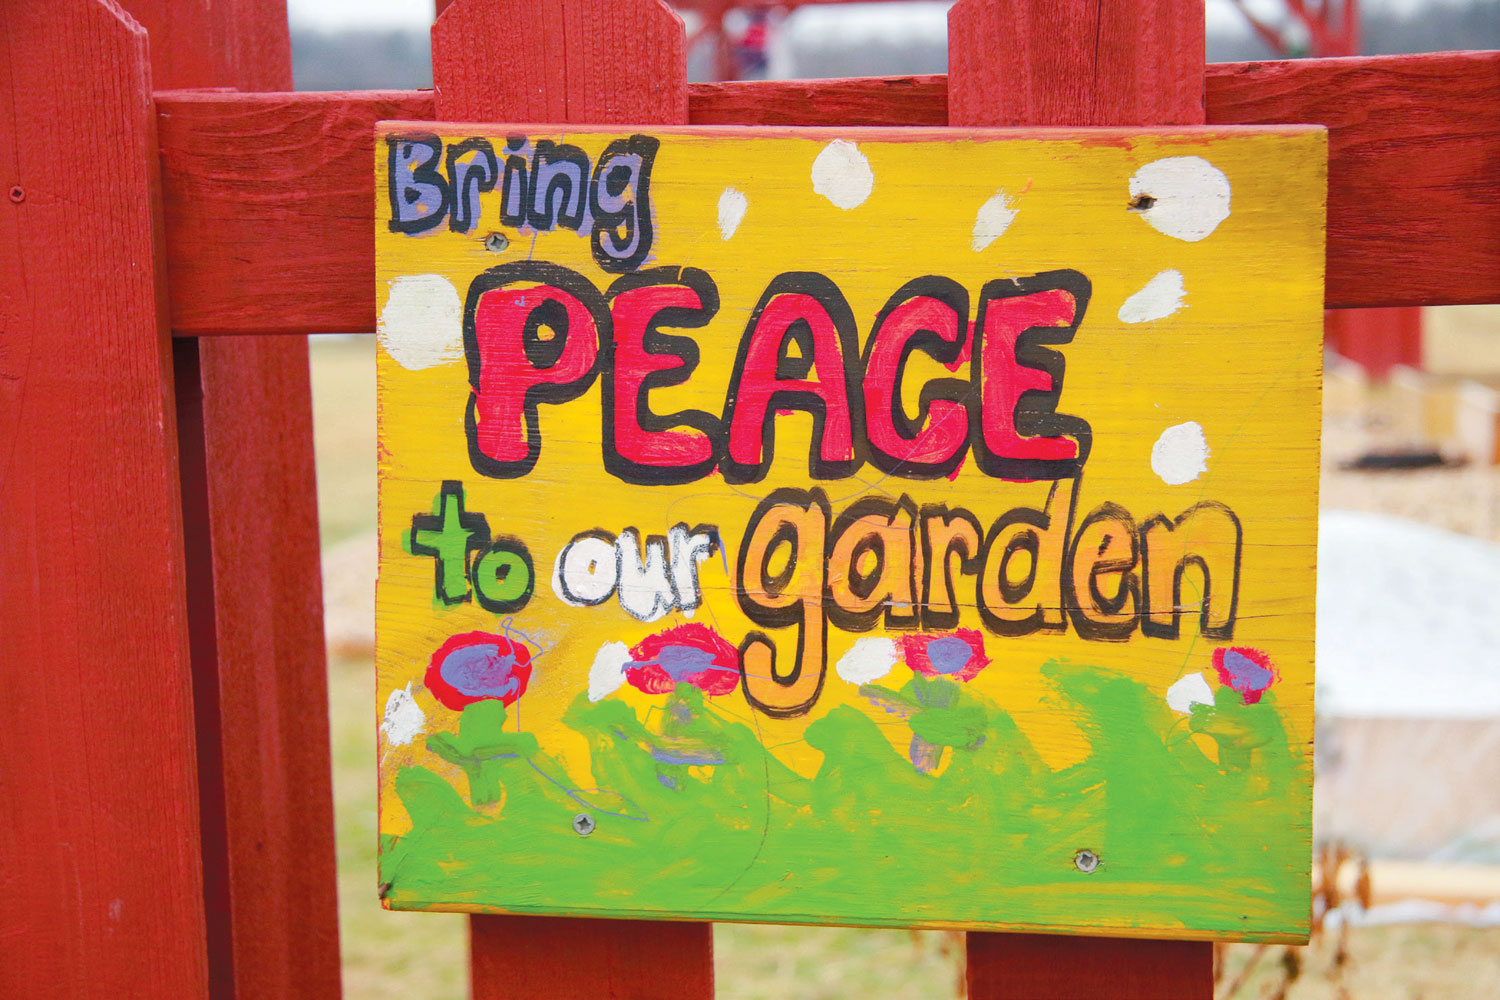 Bring peace to our garden